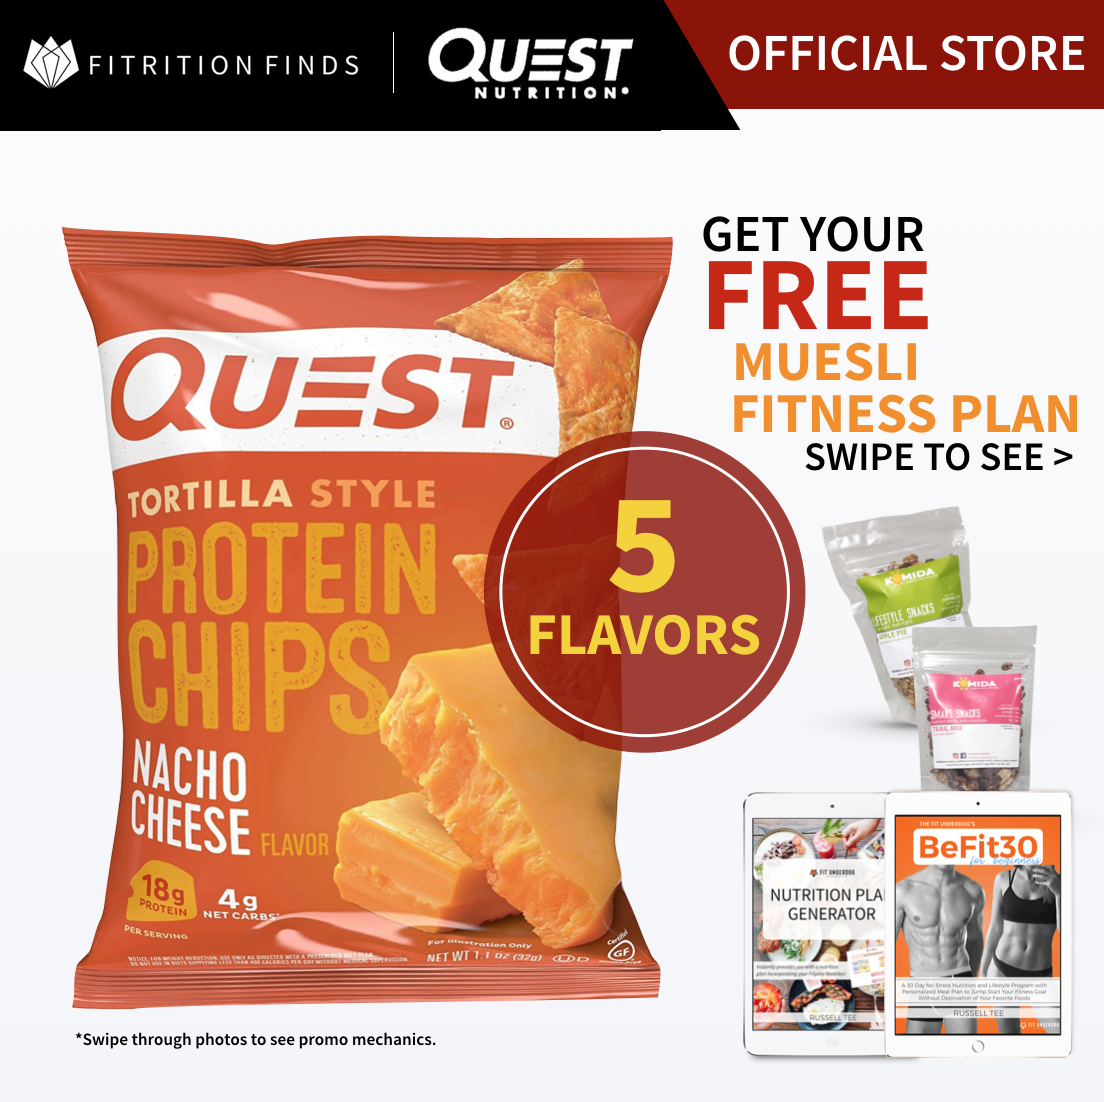 Quest Nutrition Protein Chips (1 bag, 32g) - 7 Flavors to Choose